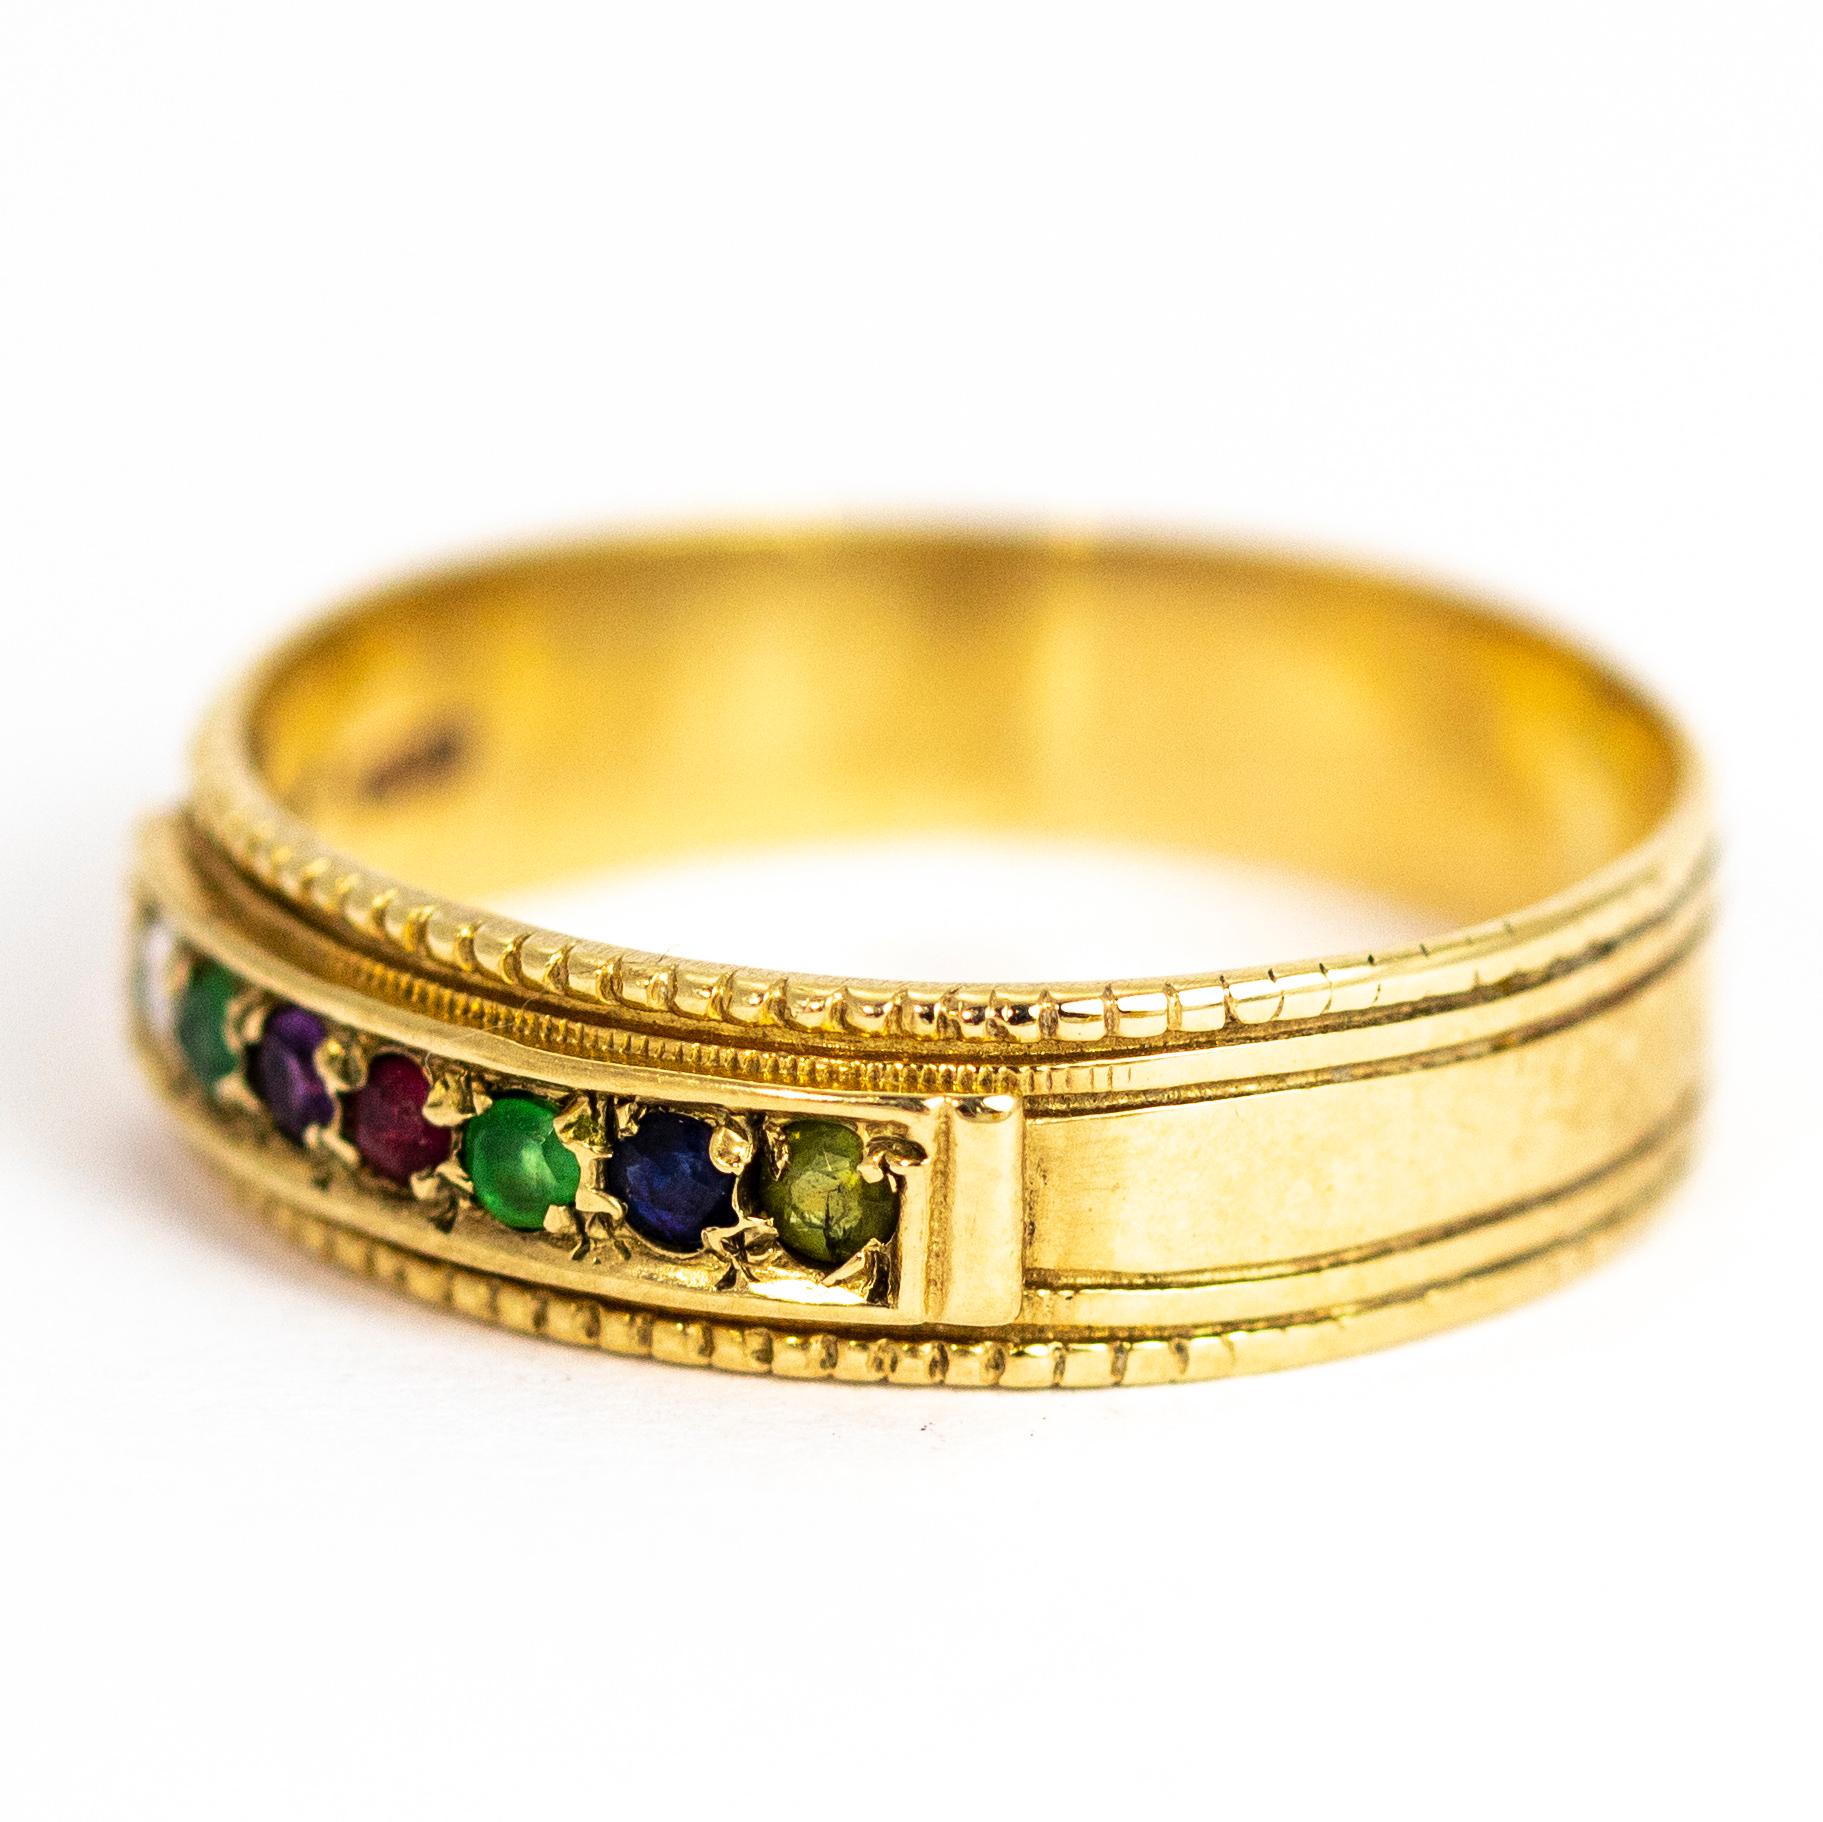 This lovely band has seven stone set within it which spell the word 'Dearest'. This is does this by using Diamond, Emerald, Amethyst, Ruby, Emerald, Sapphire and Tourmaline. The wide band is modelled in 9ct gold and has line detail engraved all the